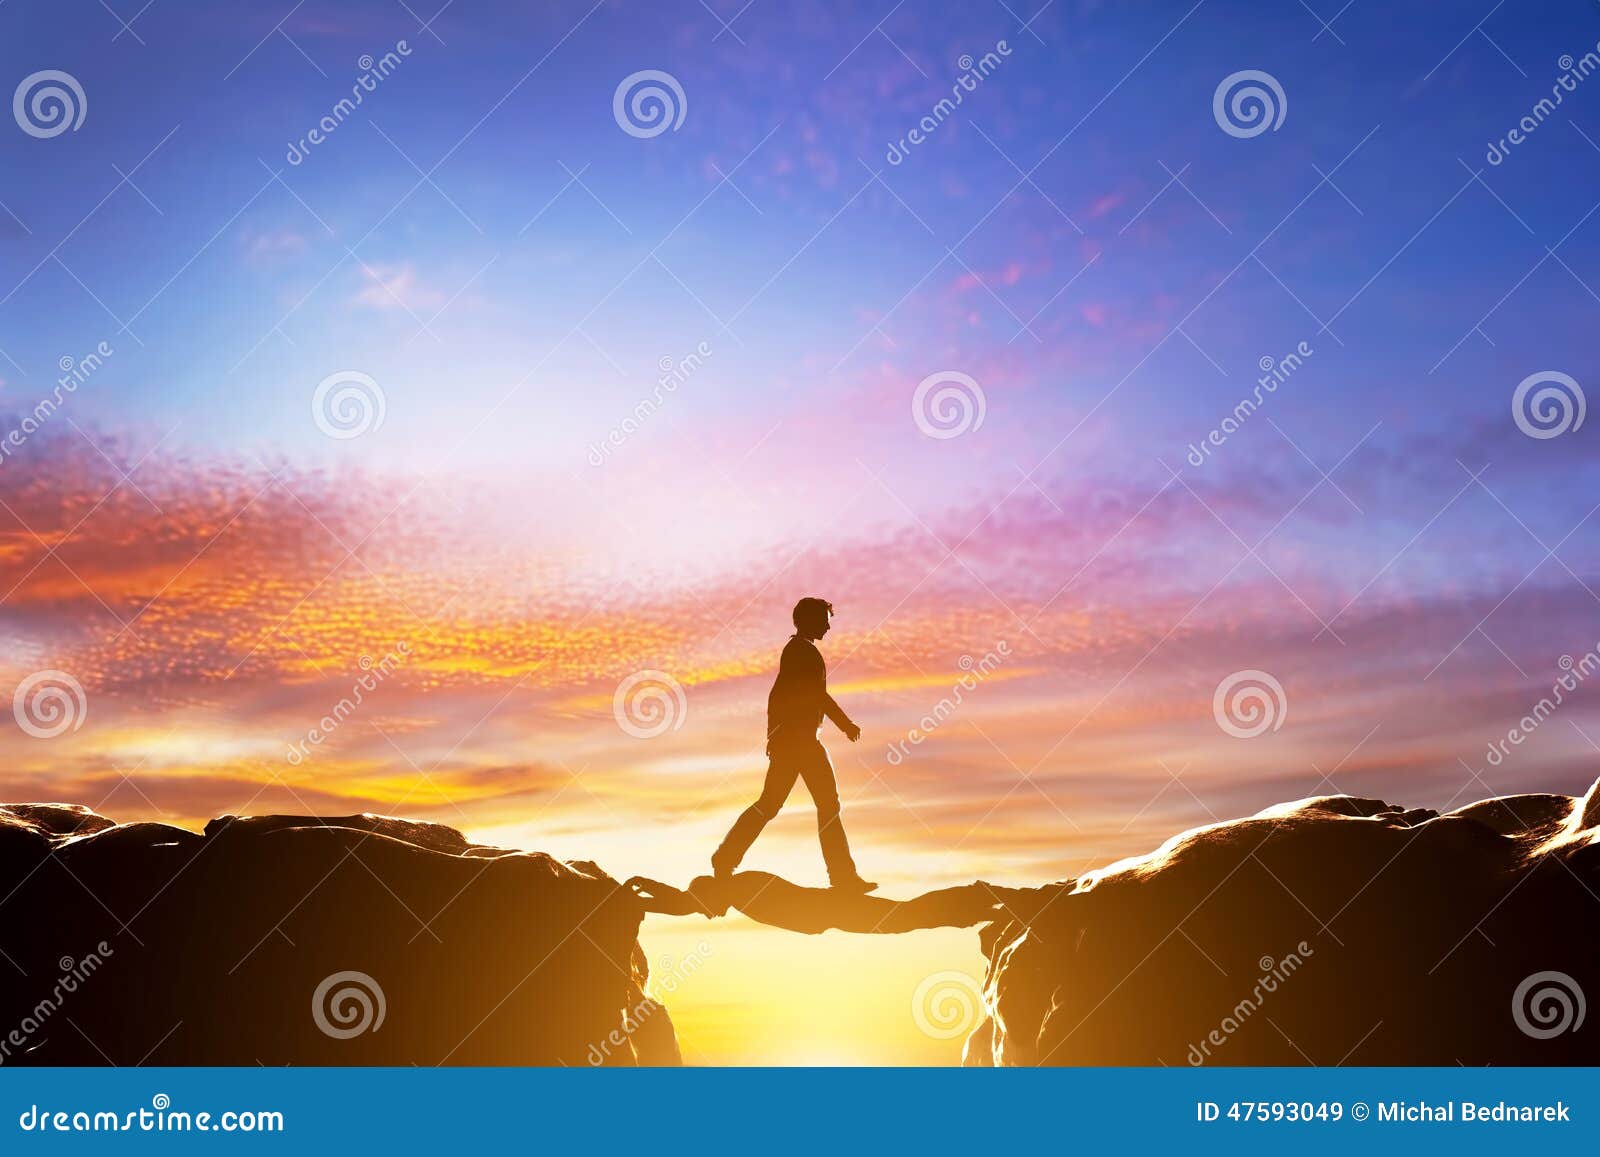 man walking on another man over precipice between mountains